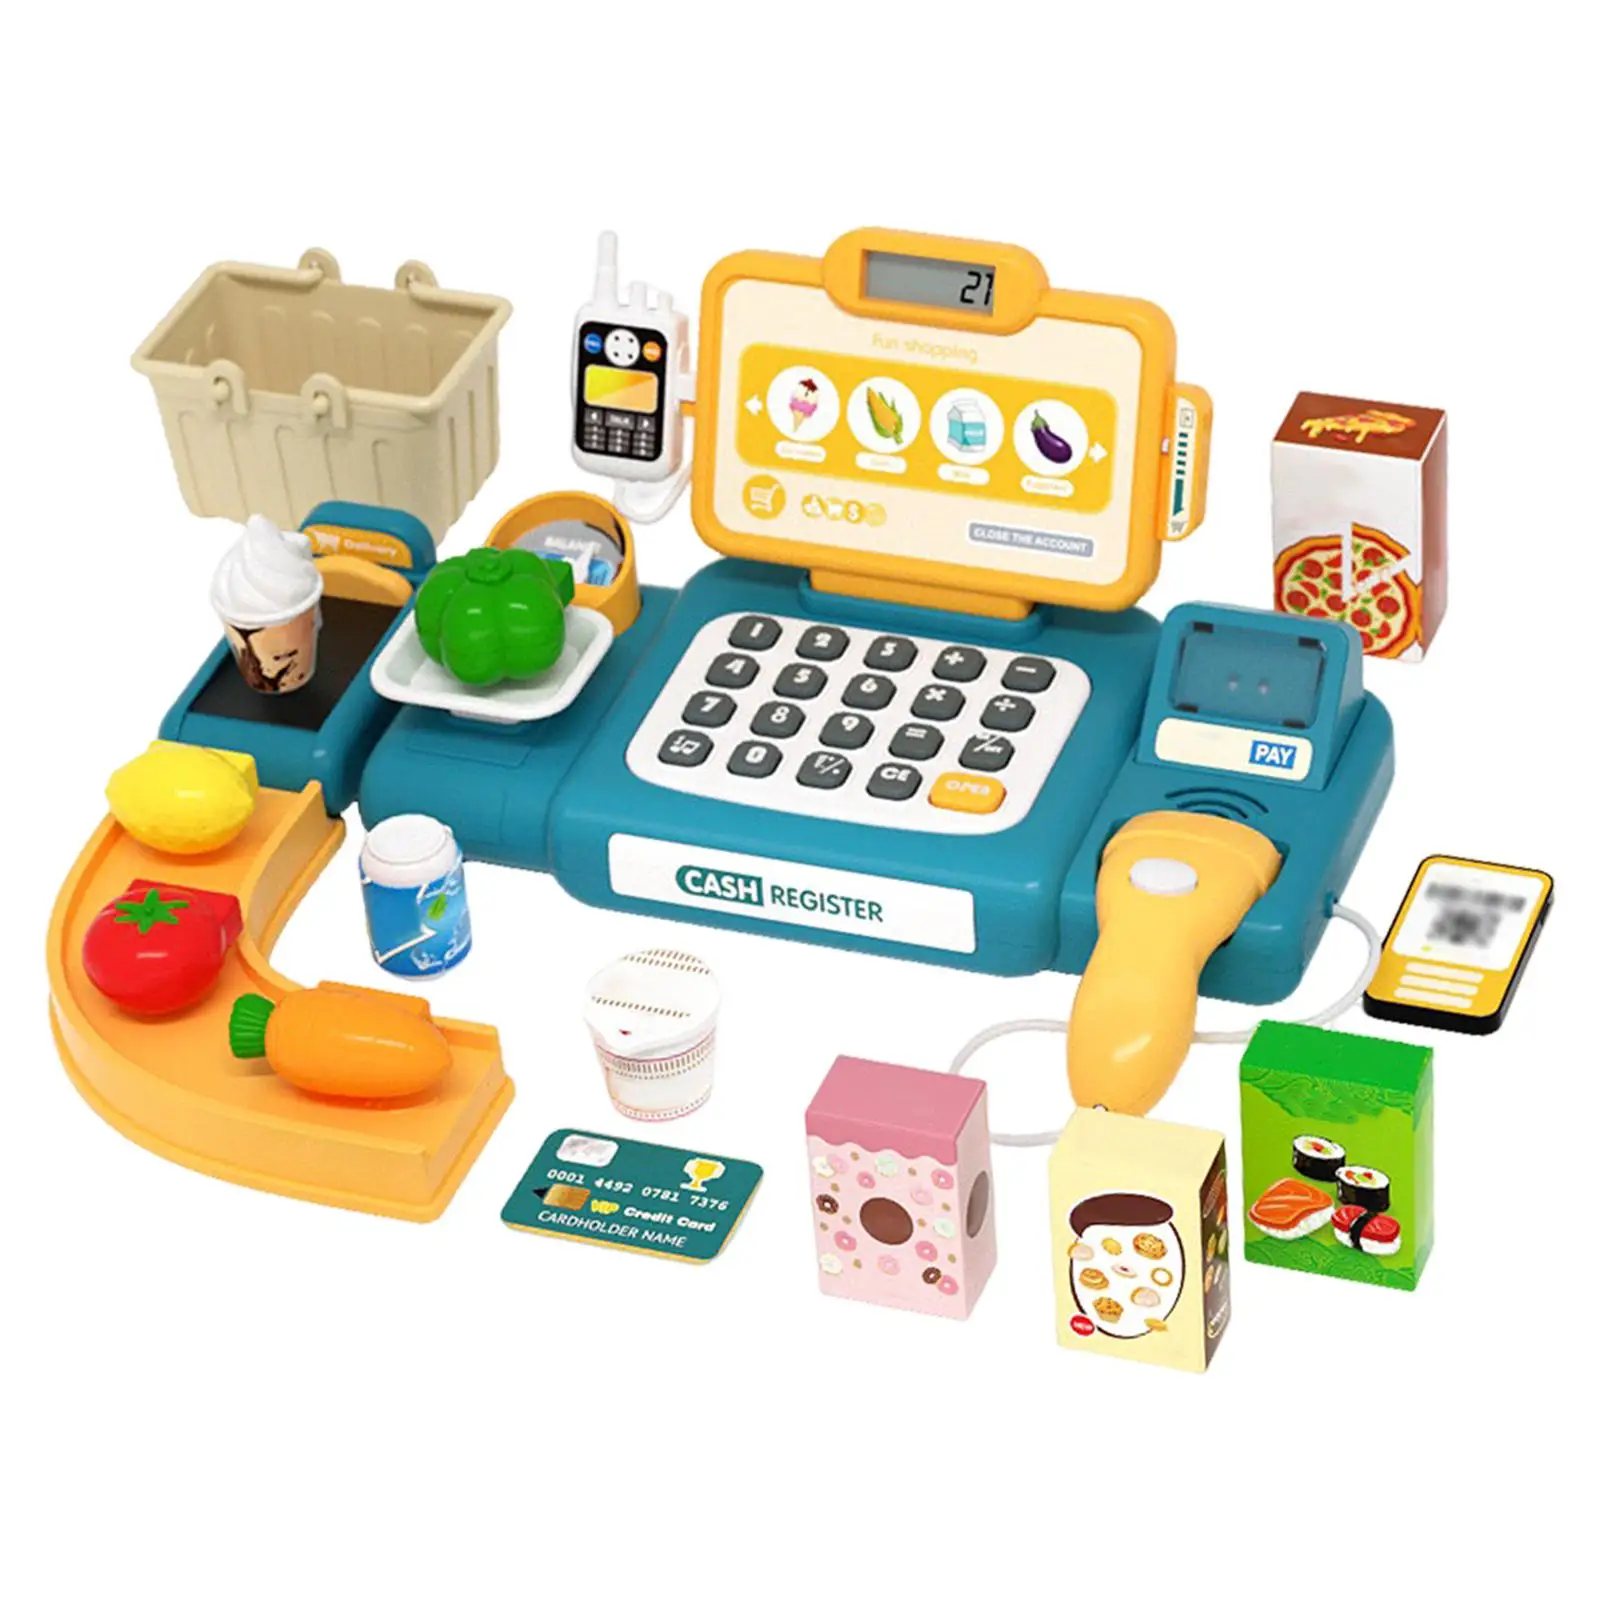 Classic Count Toy Supermarket Cashier Toy for Role Play Activity